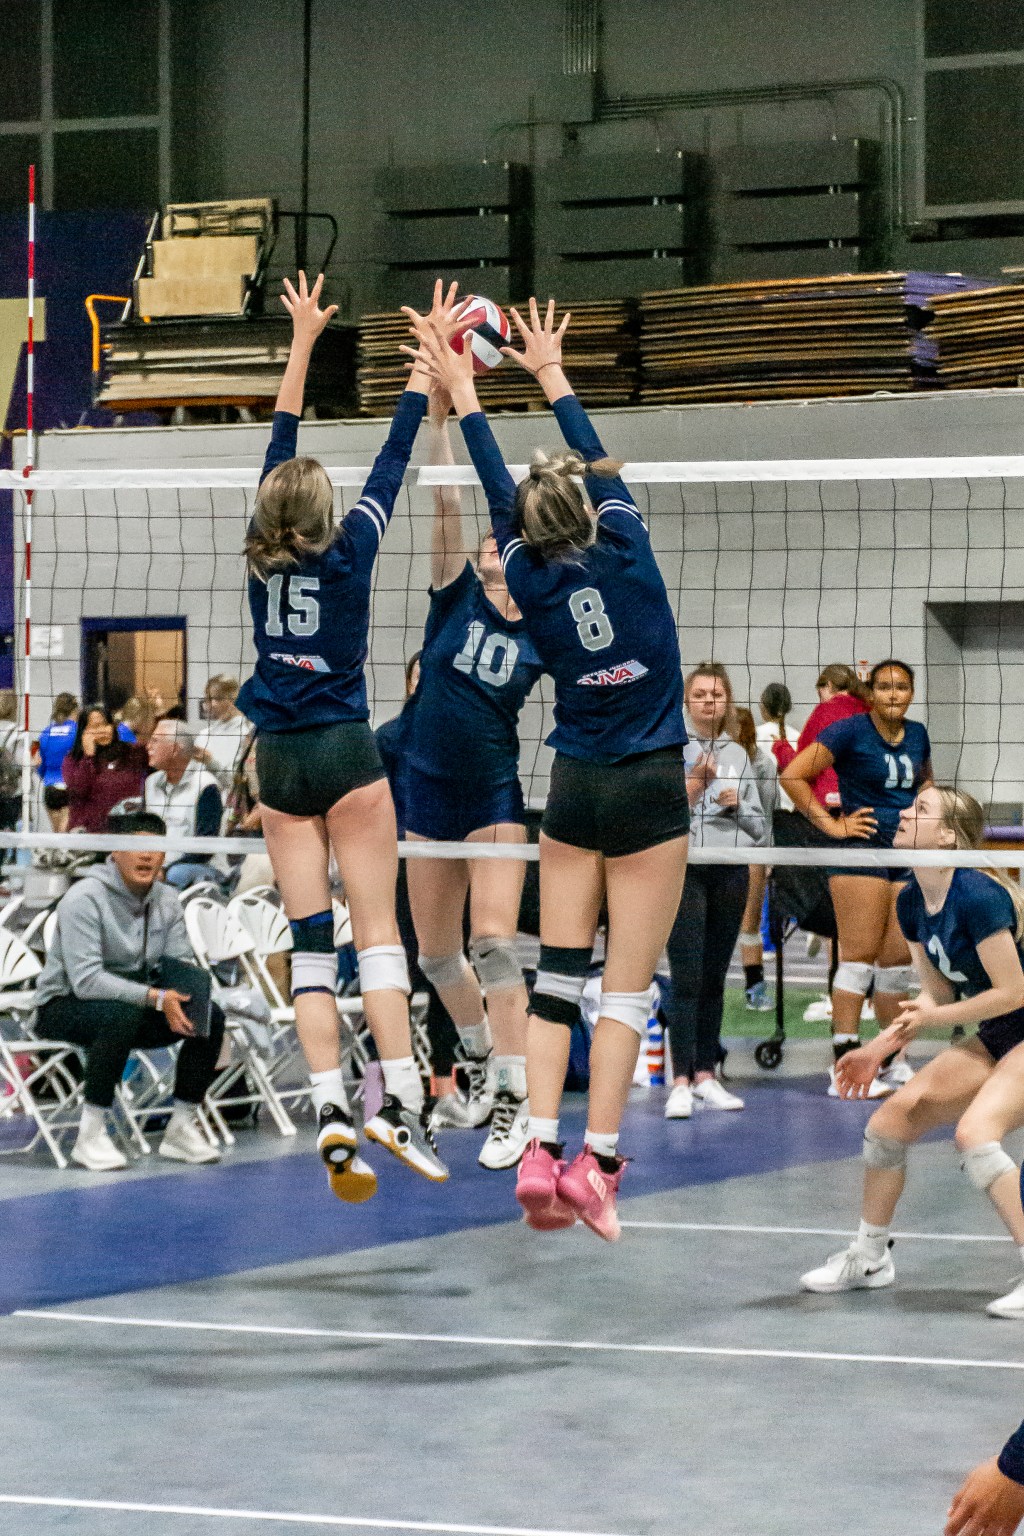 Washington Attackers at the Far Western Classic